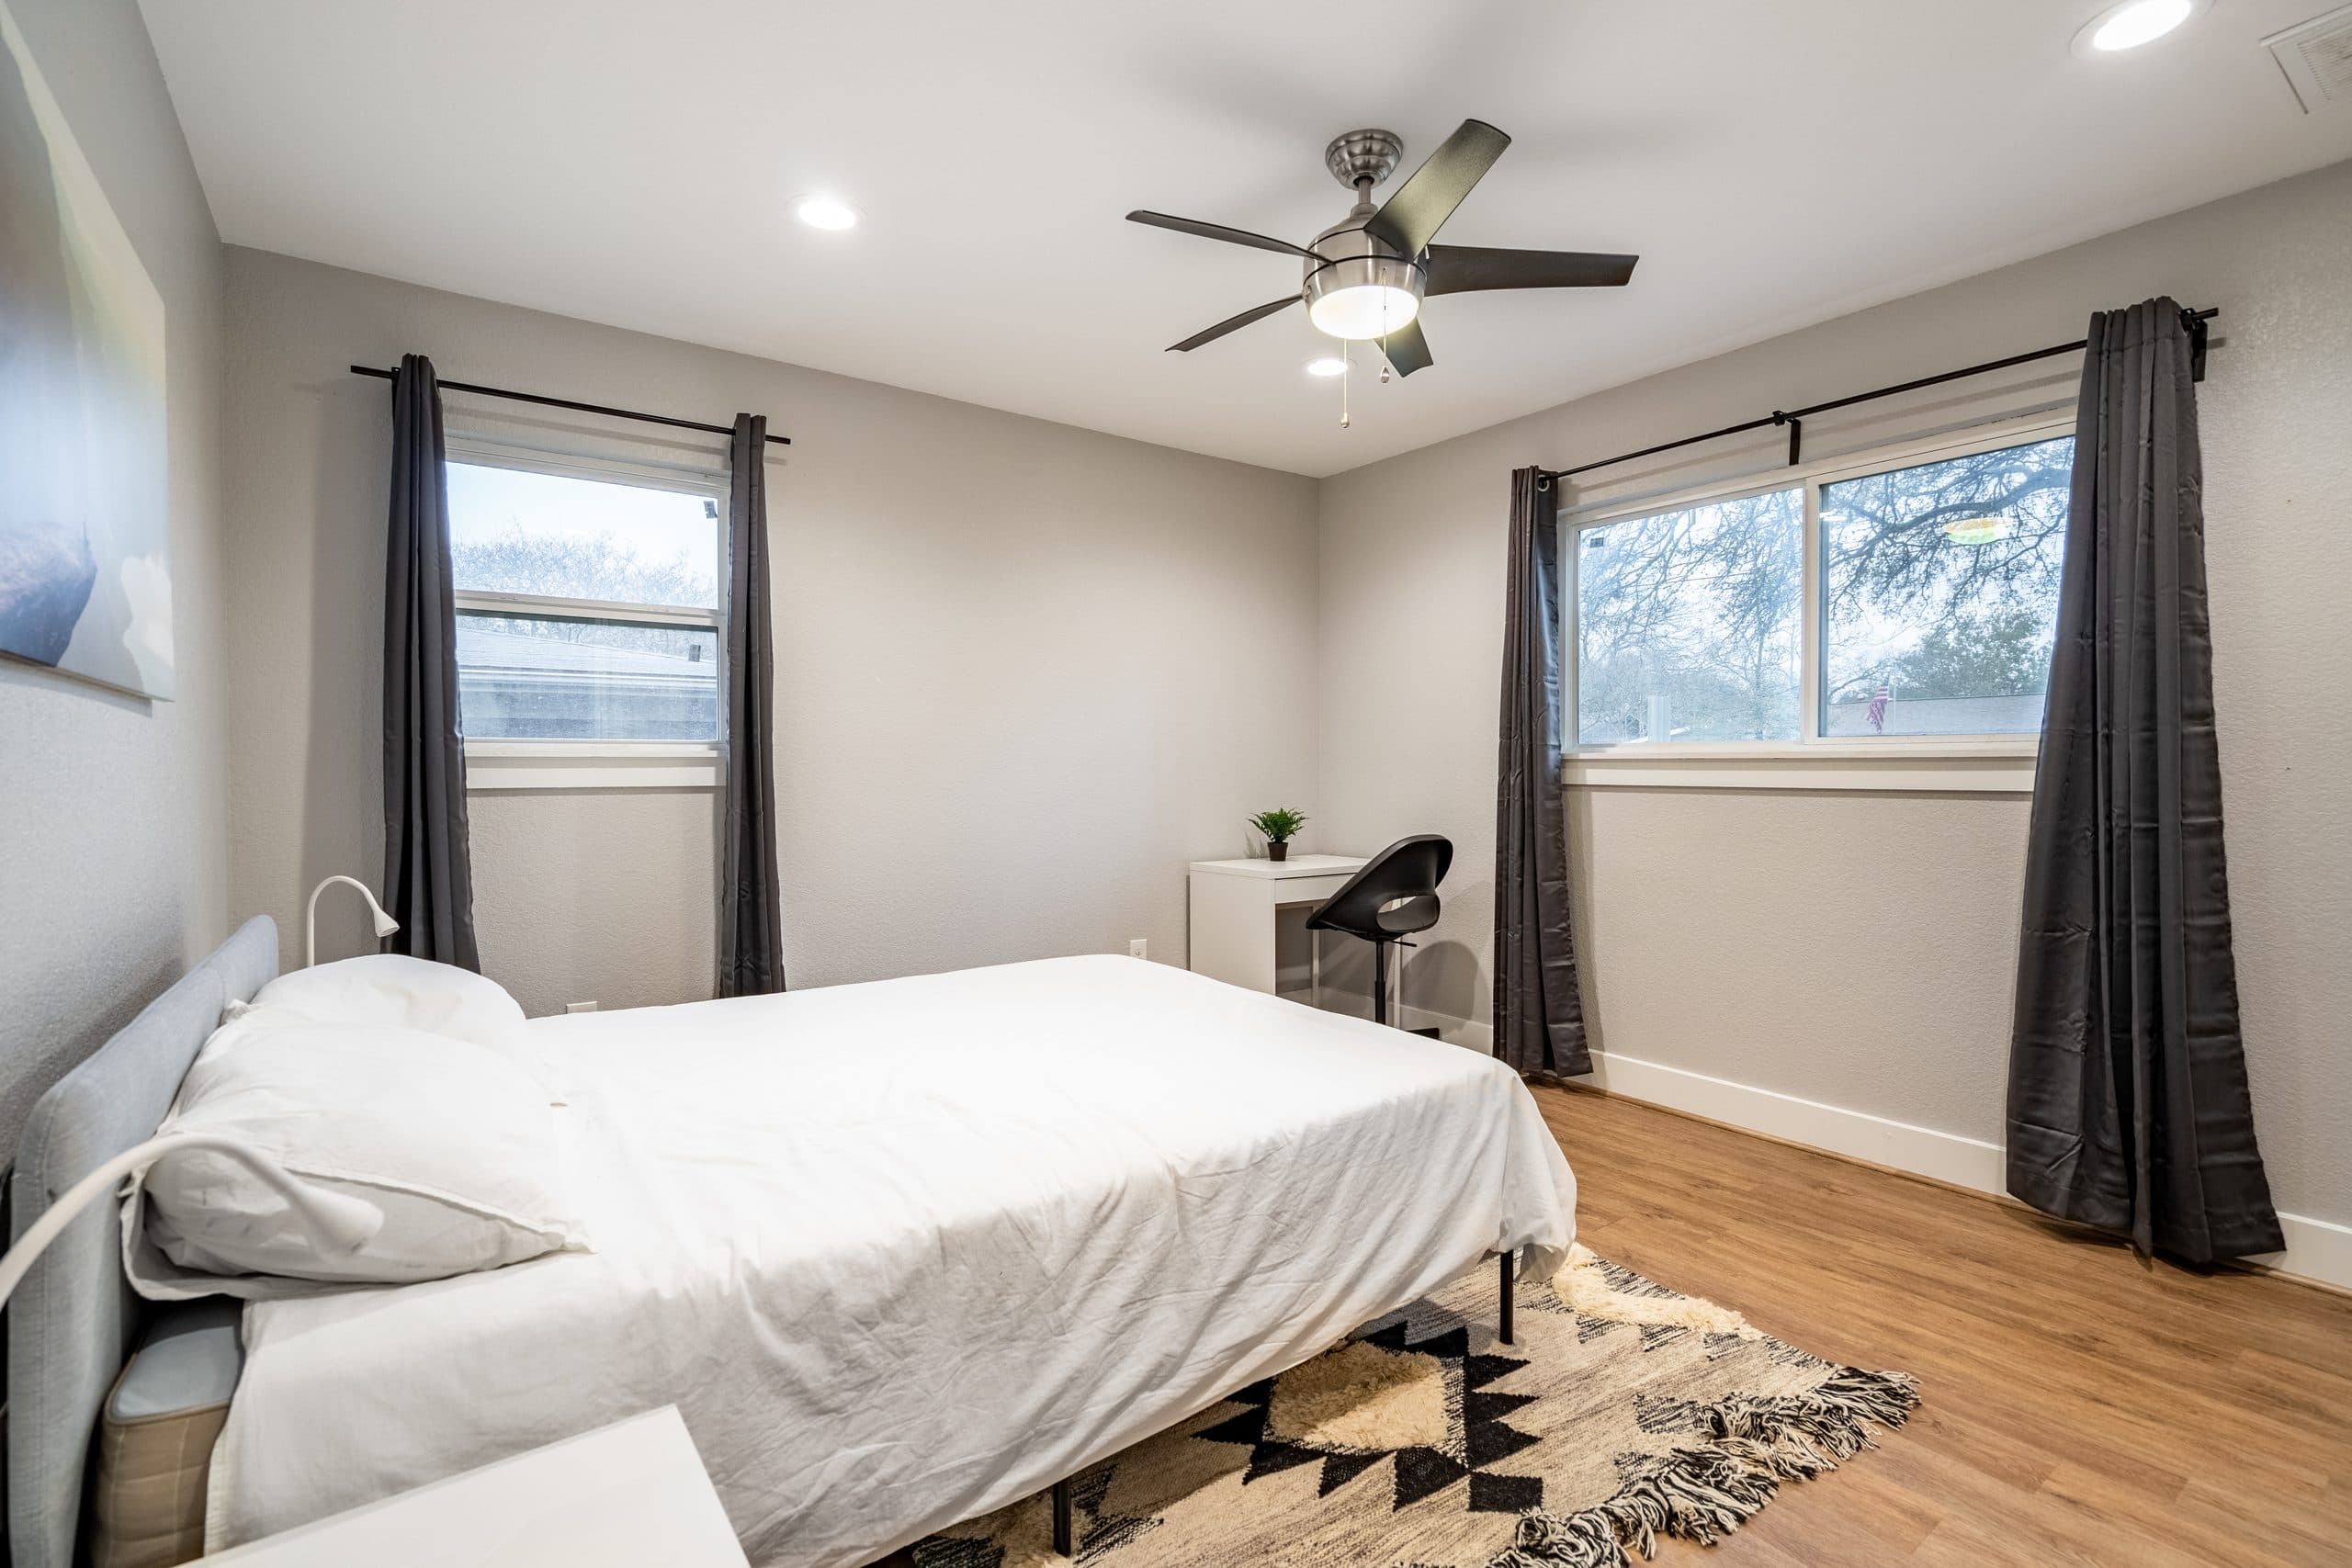 Photo 33 of #2249: Queen Bedroom A at June Homes